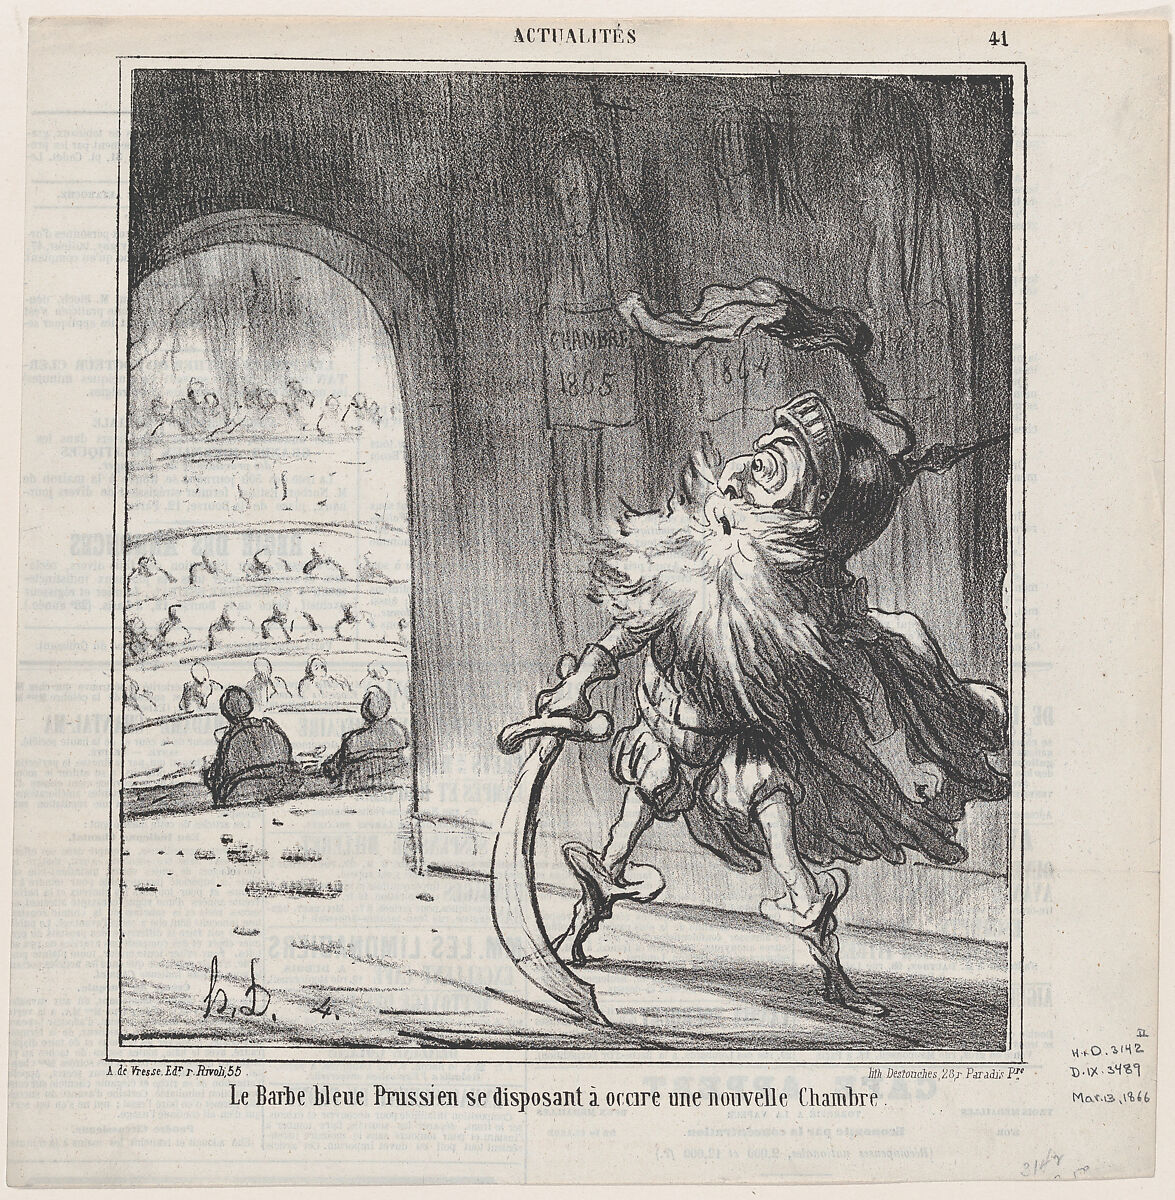 The Prussian bluebeard getting ready to finish off another new Chamber of Deputies, from 'News of the day,' published in Le Charivari, March 13, 1866, Honoré Daumier (French, Marseilles 1808–1879 Valmondois), Lithograph on newsprint; third state of three (Delteil) 